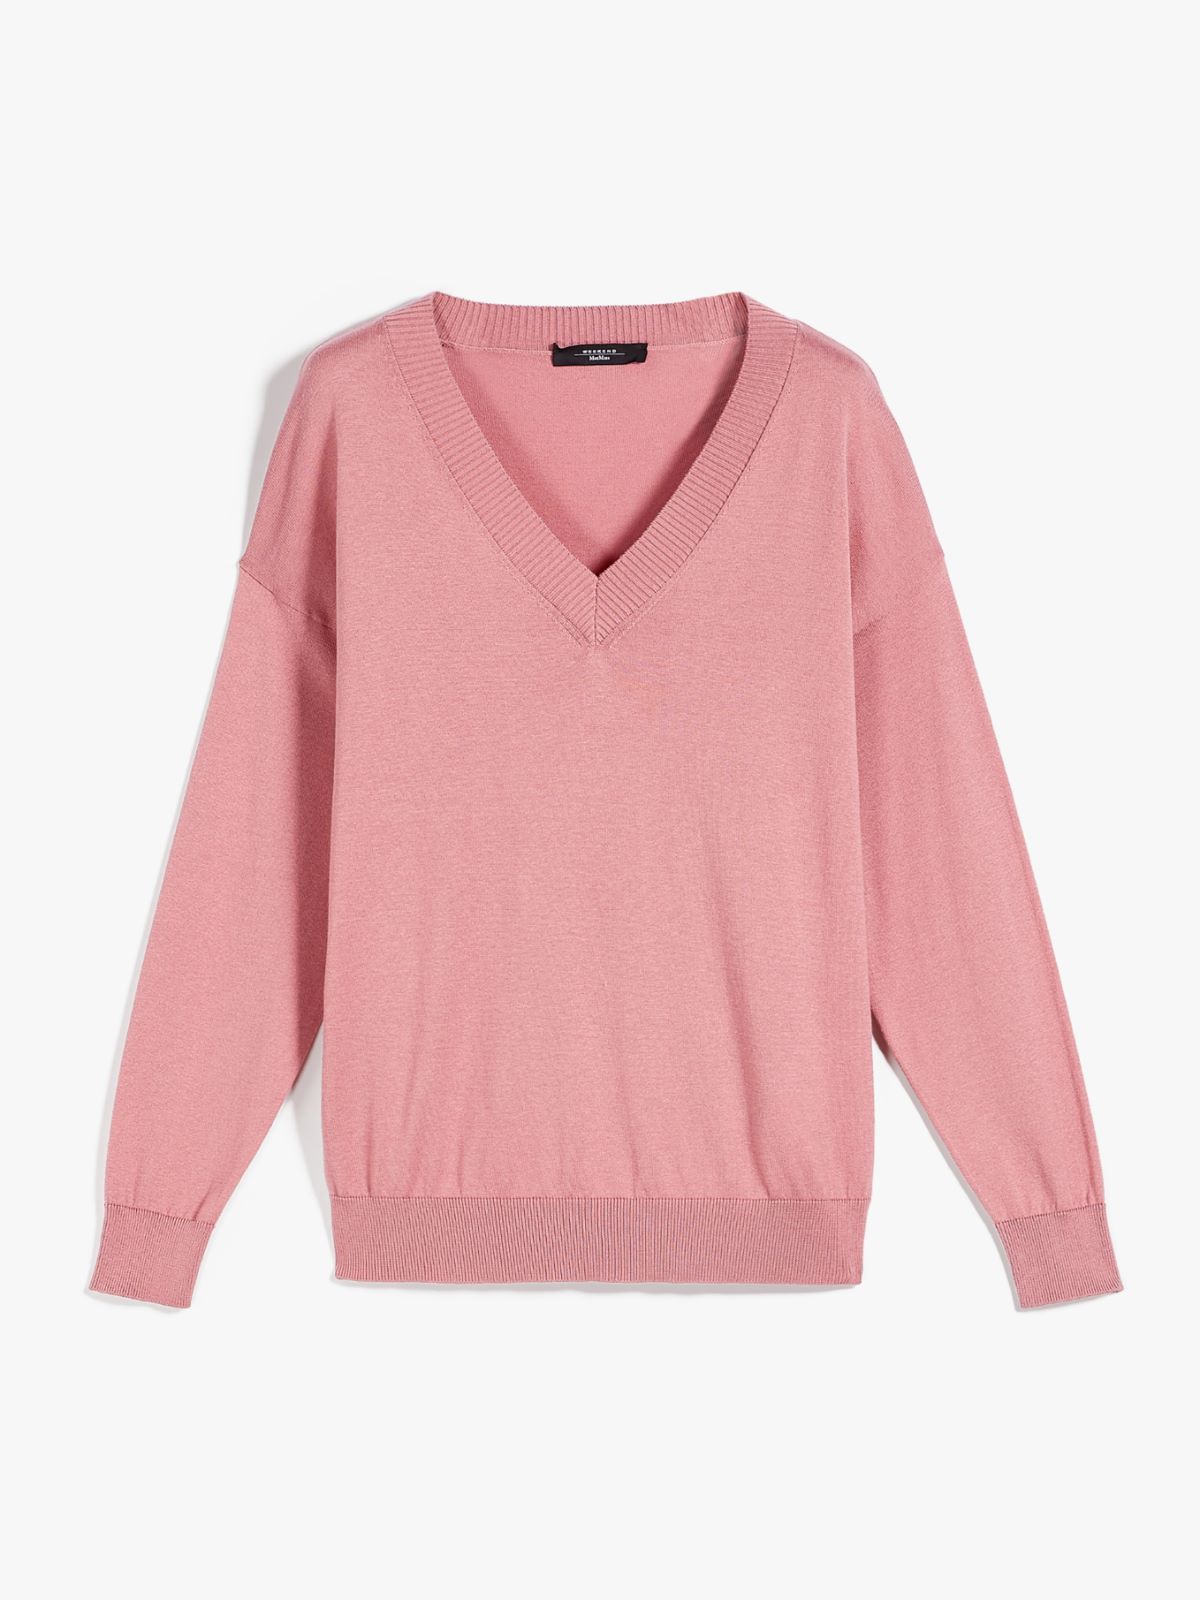 Cotton and silk yarn sweater - ANTIQUE ROSE - Weekend Max Mara - 6